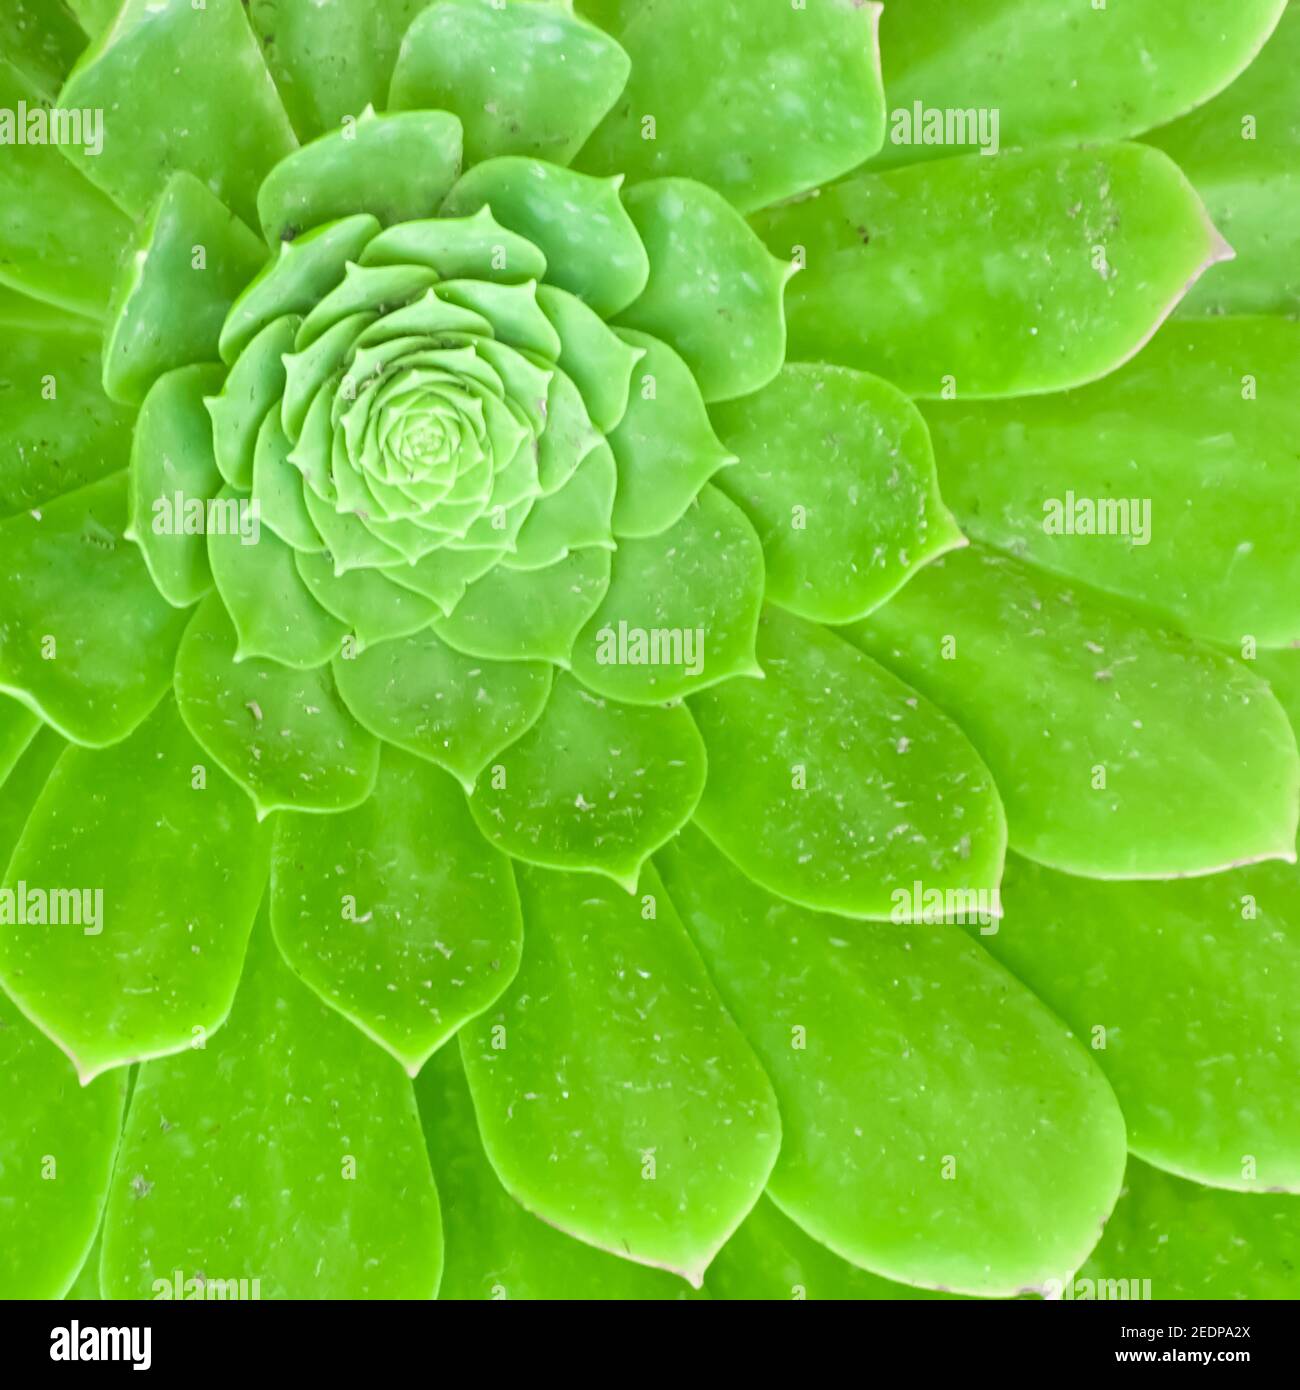 Rosette of leaves of an Aeonium arboreum commonly known as tree aeonium, tree houseleek, or Irish rose, is a succulent, subtropical subshrub in the fl Stock Photo